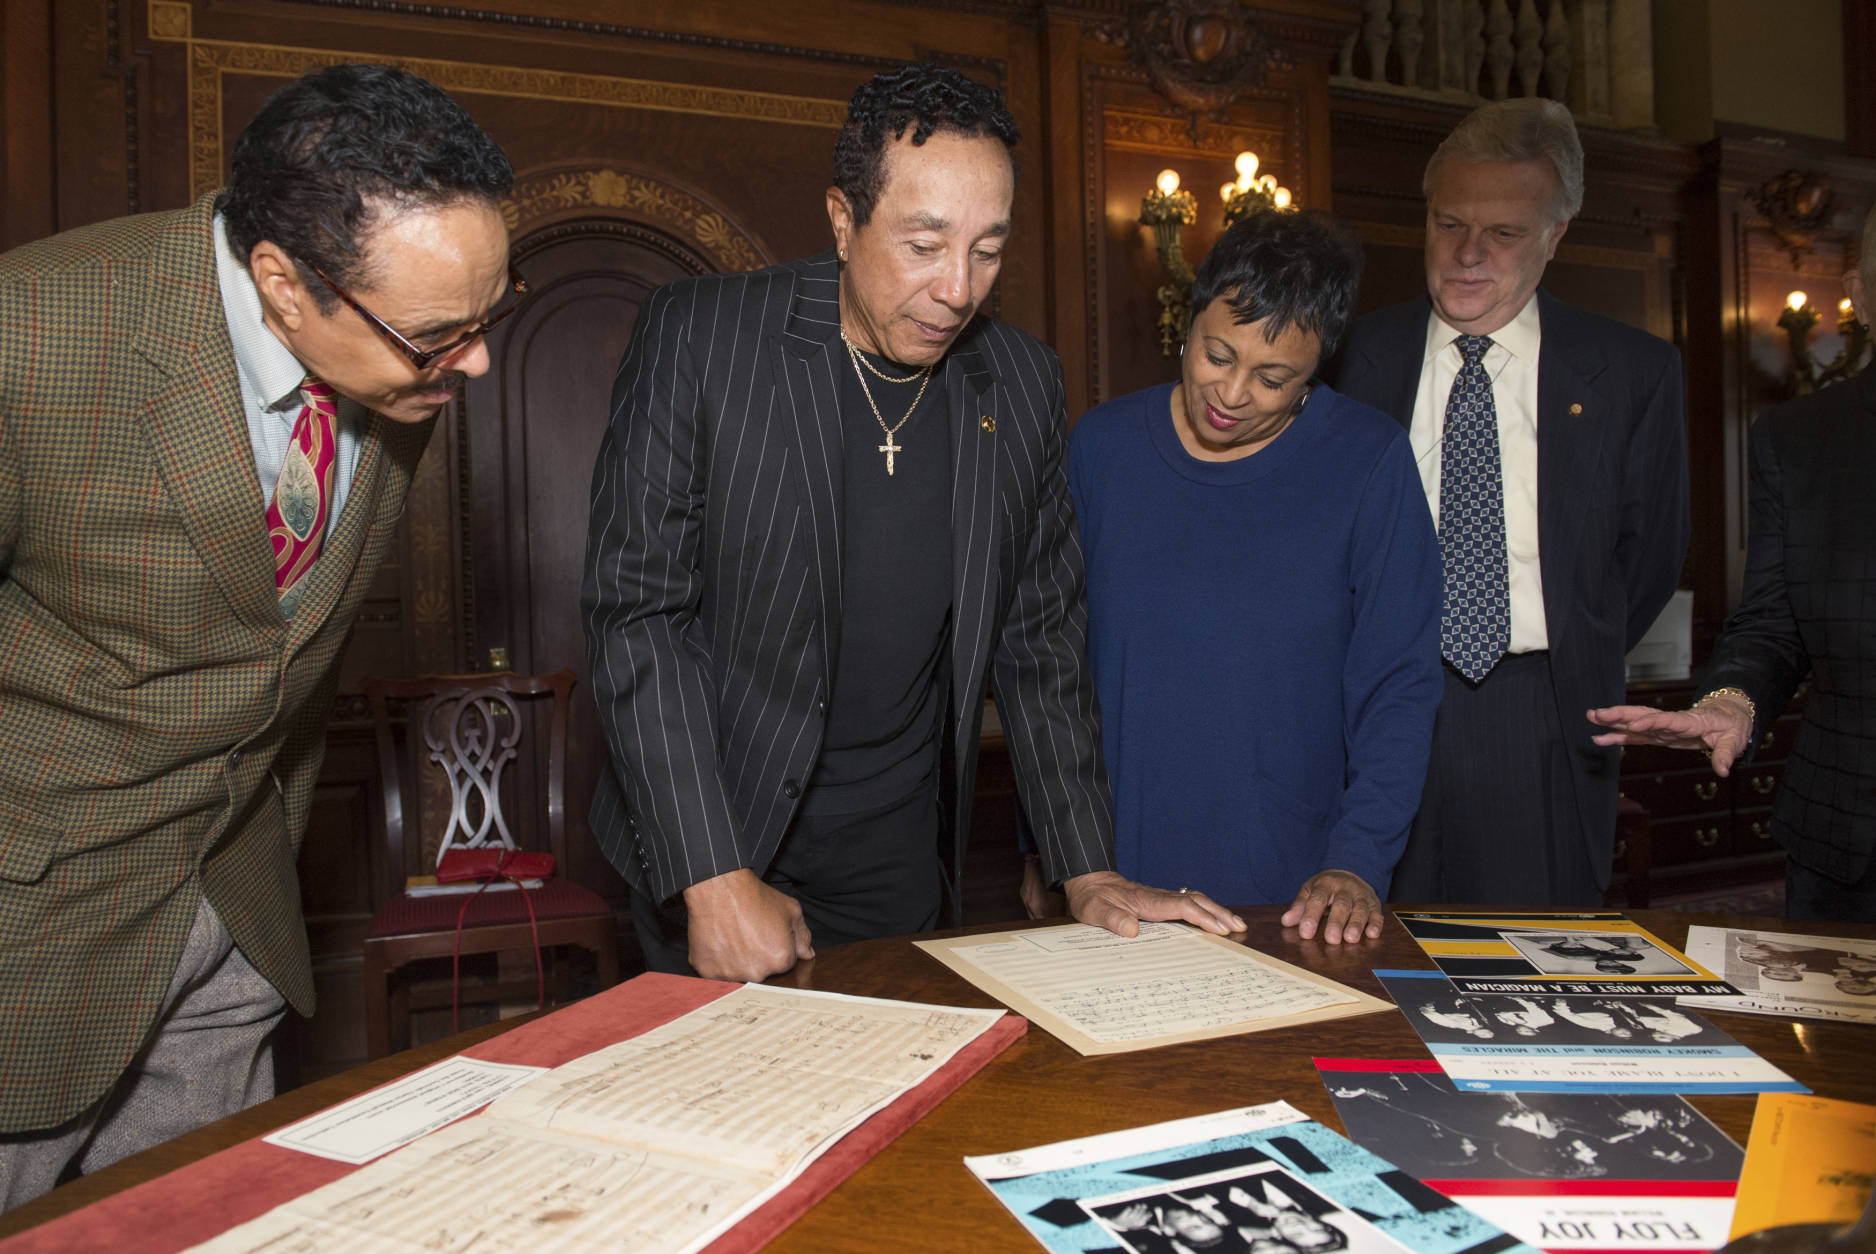 Gershwin Prize recipient Smokey Robinson looks at items from Motown era in a special display with Library of Congress Librarian Carla Hayden, second from right, and Senior Music Specialist Raymond White, right, while visiting the Library of Congress in Washington, Tuesday, Nov. 15, 2016. (AP Photo/Molly Riley)